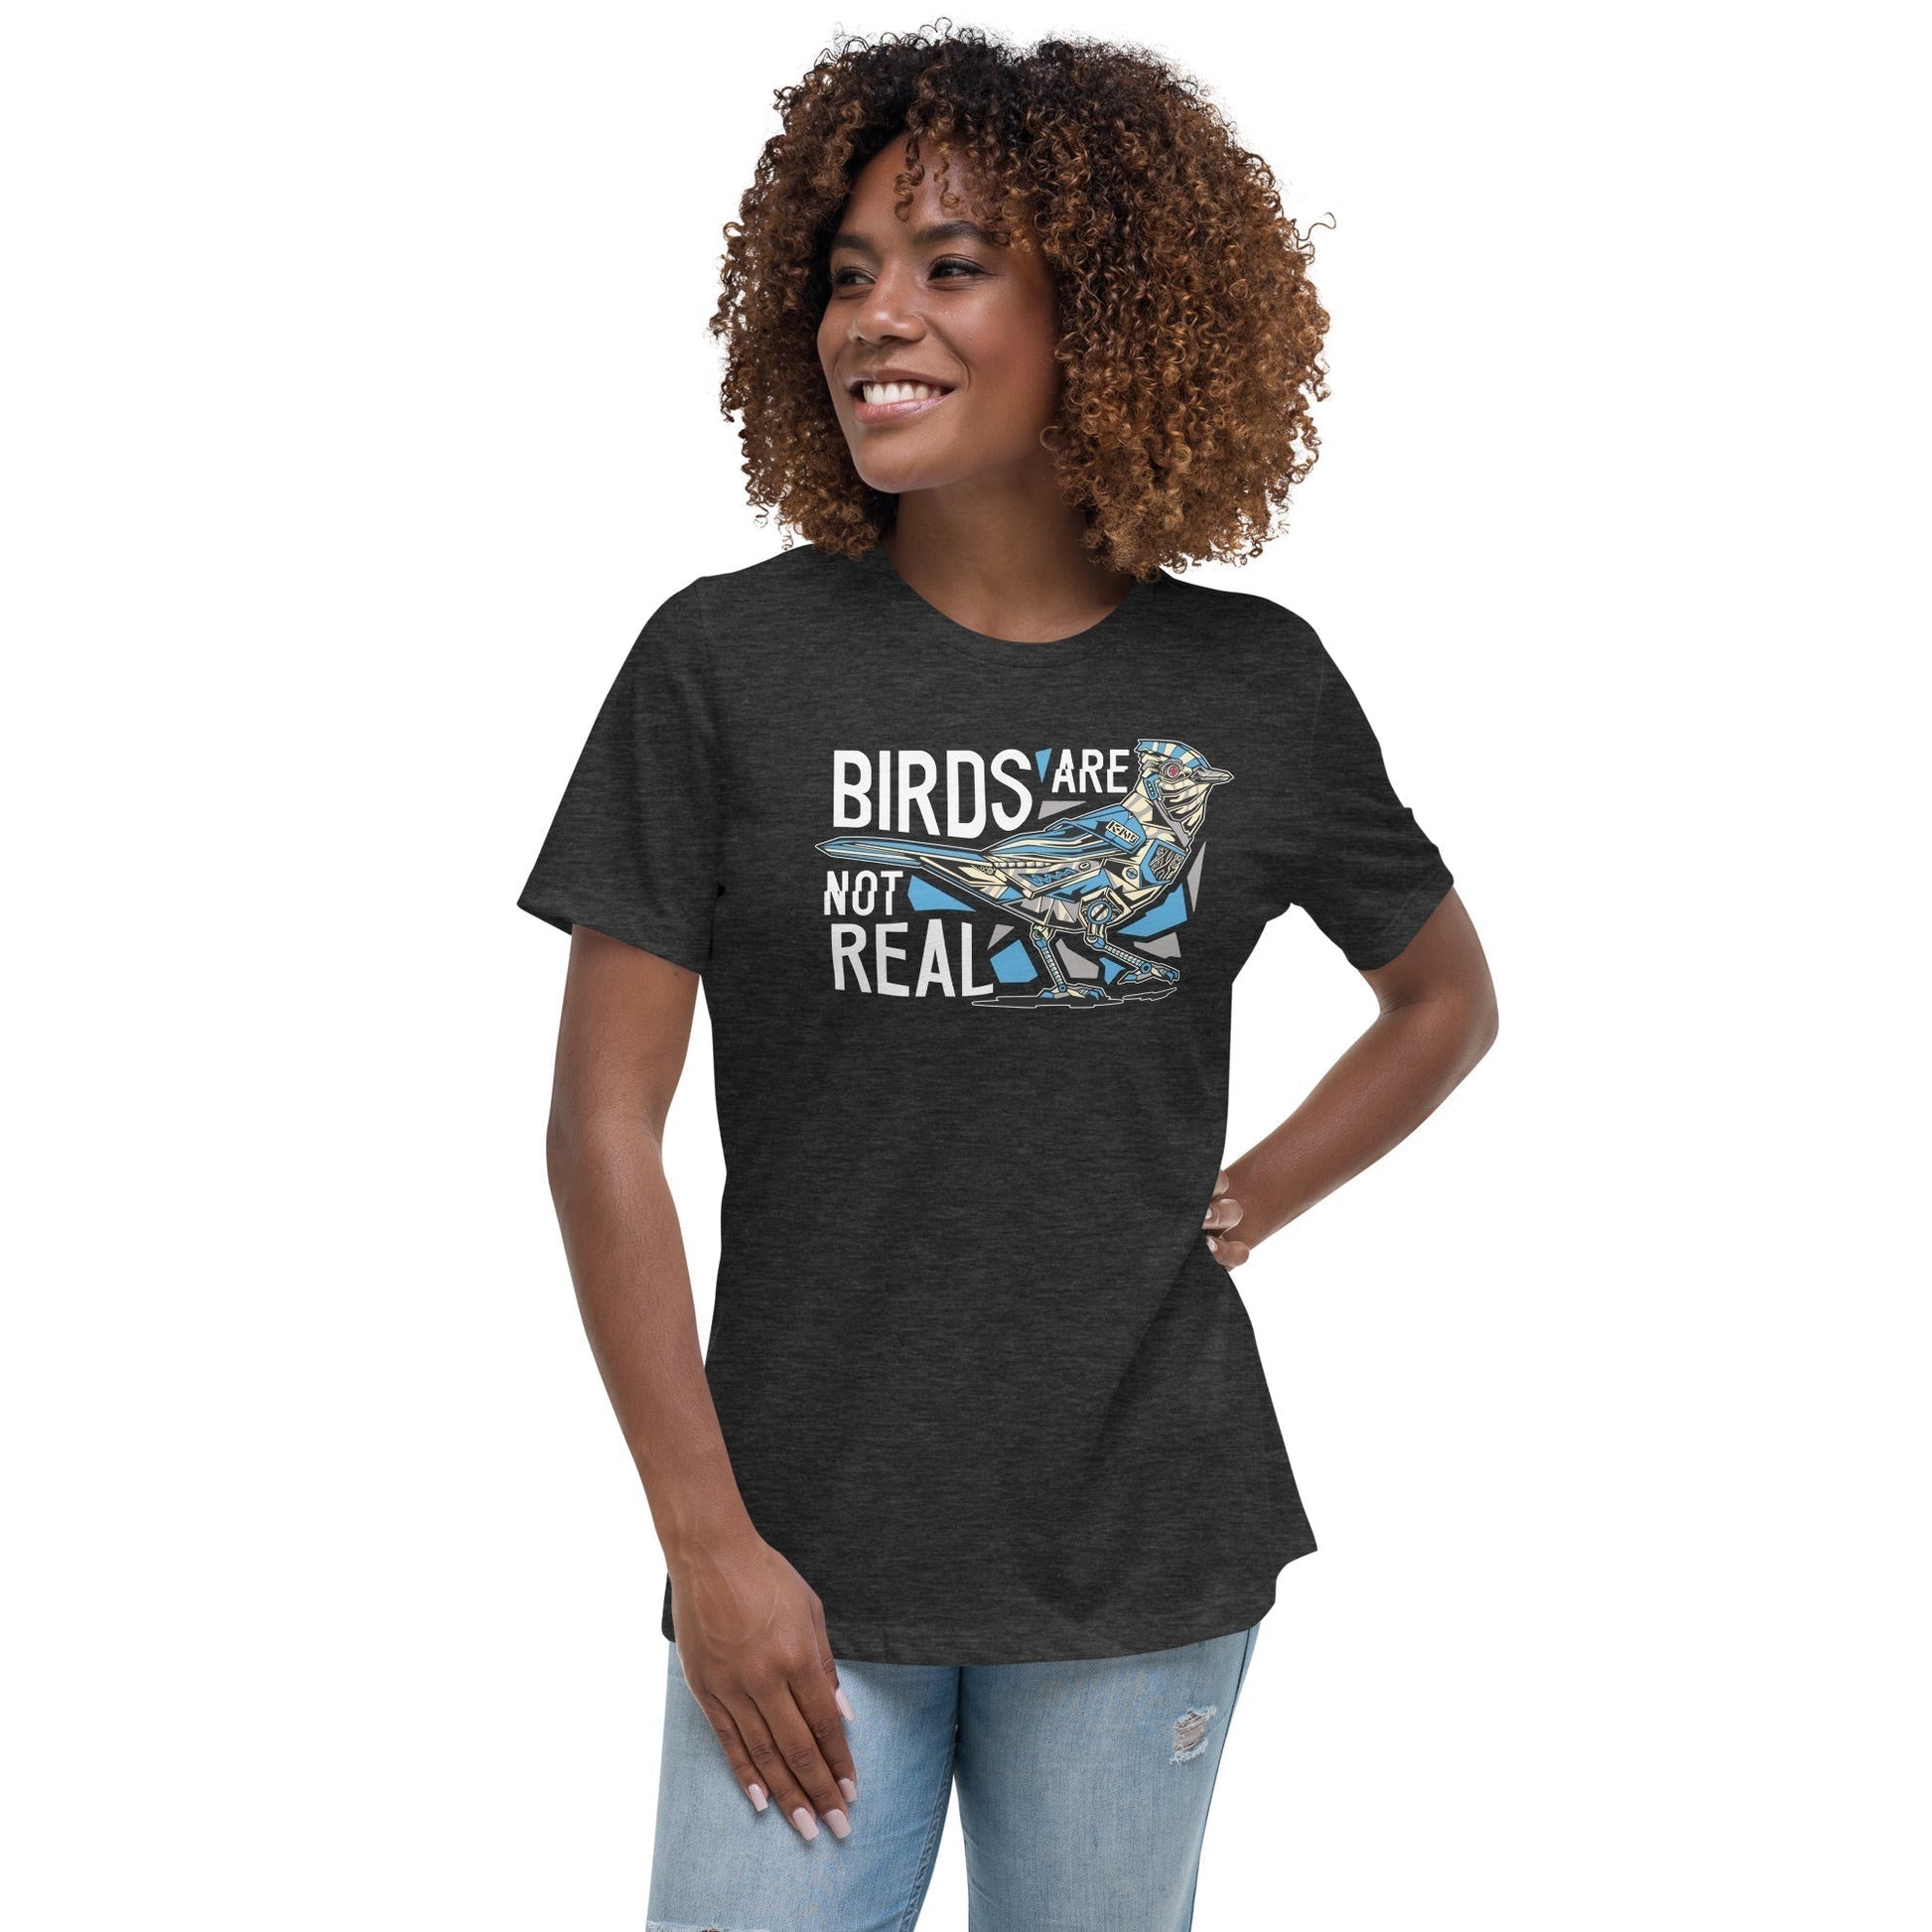 Birds are not real - Women's T-Shirt